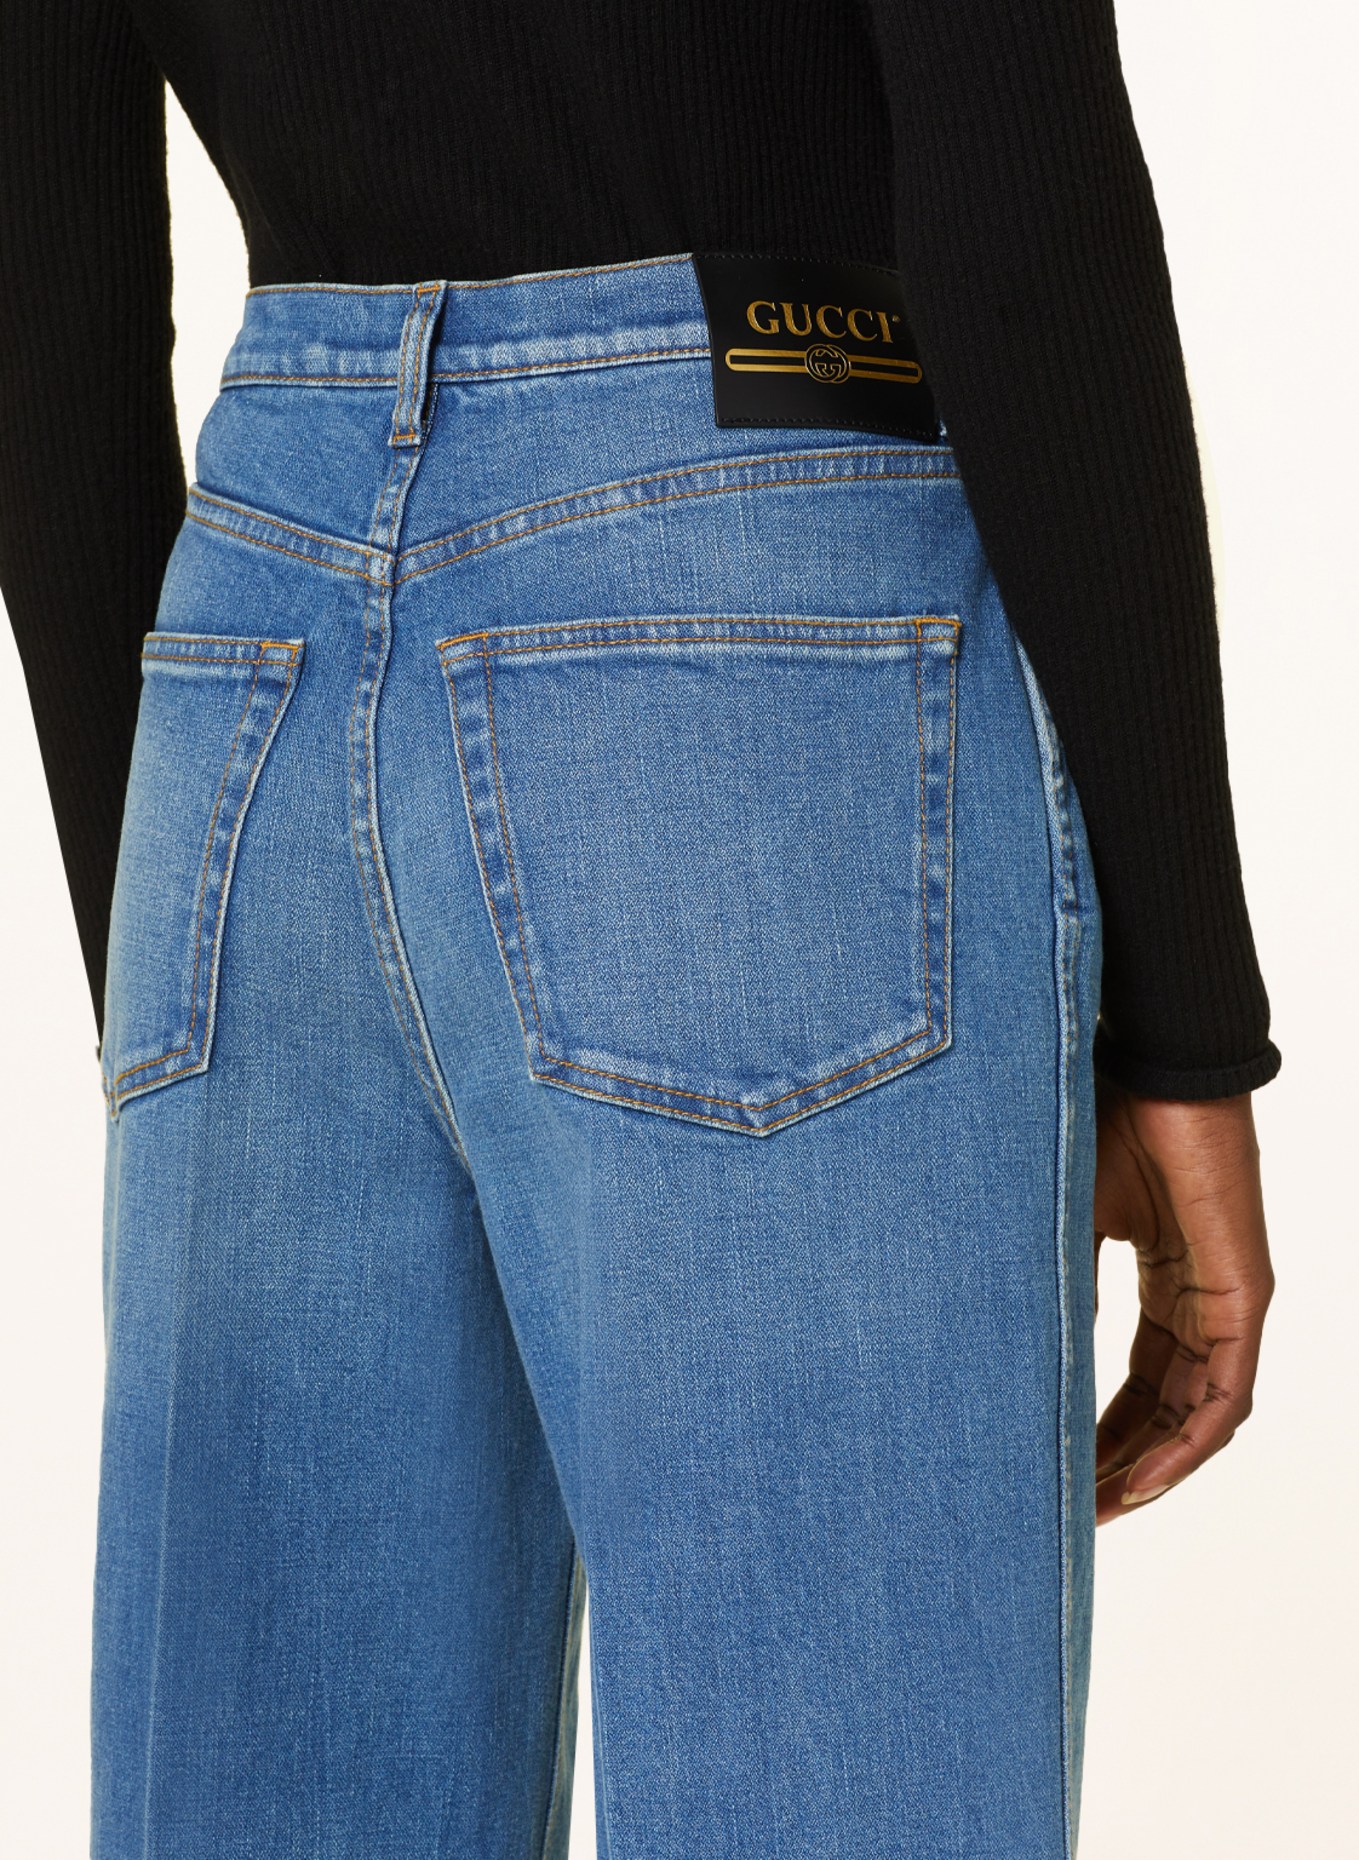 GUCCI Flared jeans, Color: 4759 DARK BLUE/MIX (Image 6)